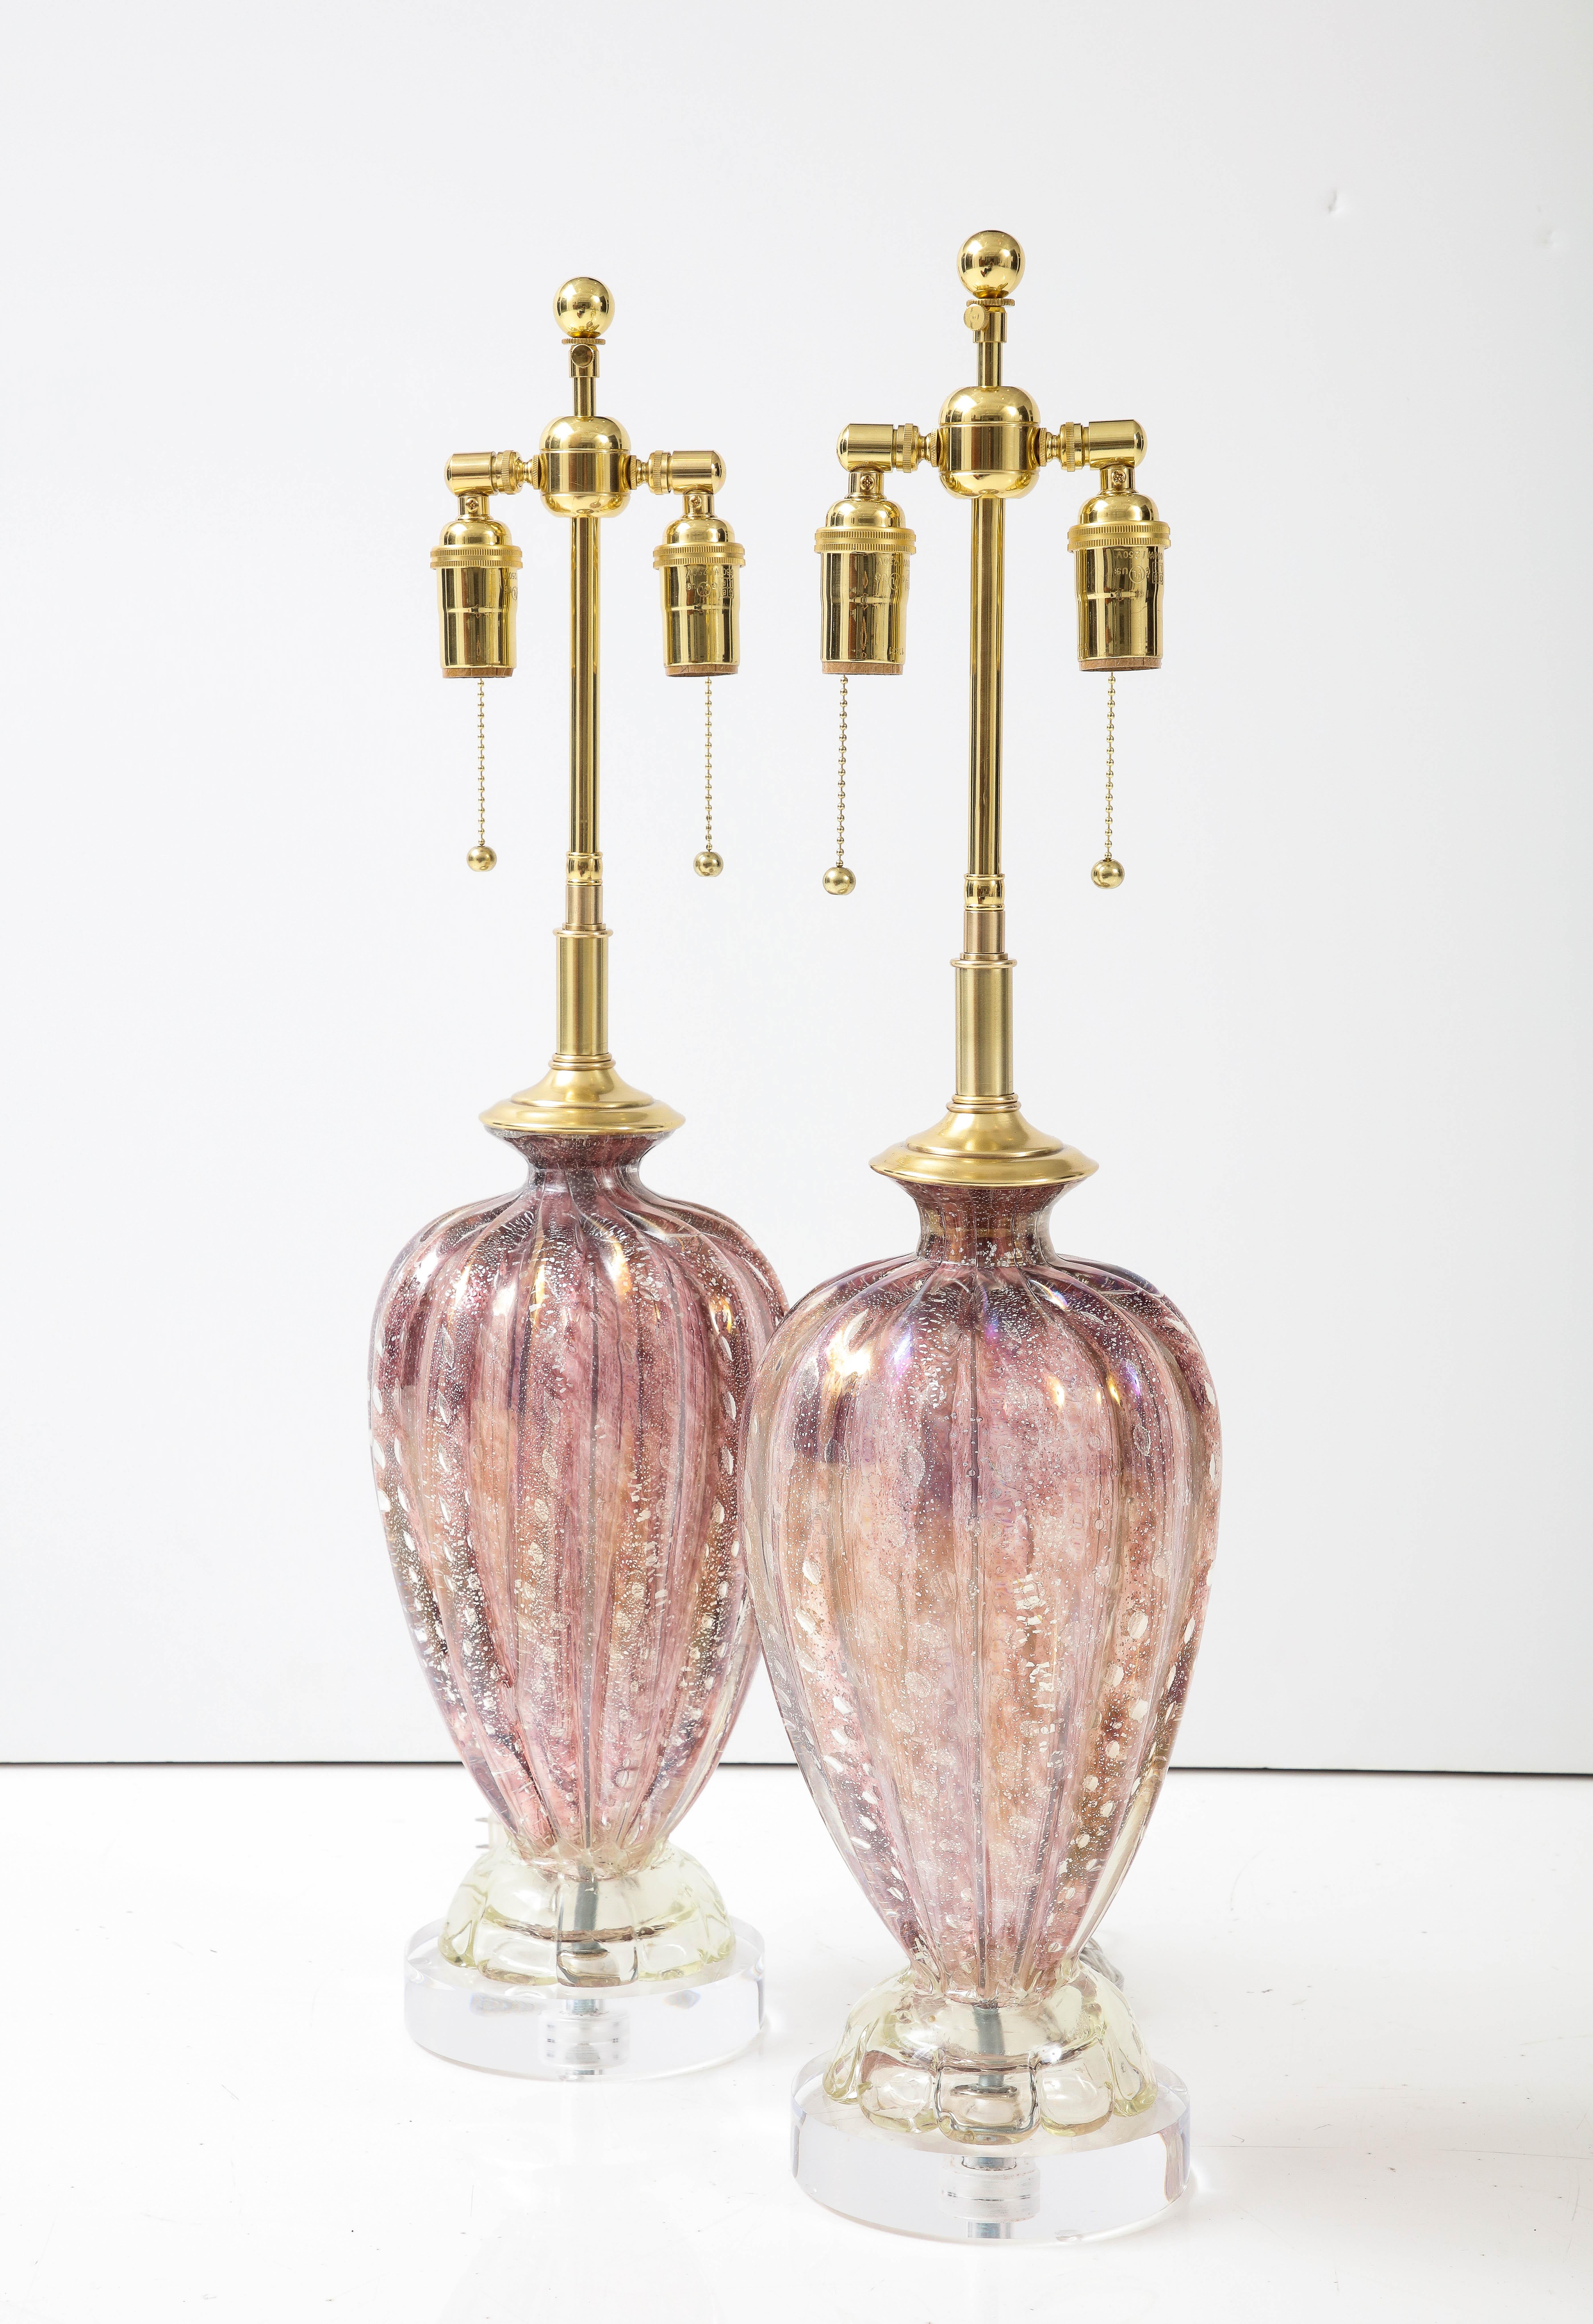 Pair of 1950's Murano glass lamps by Barovier & Toso.
The Beautiful Mauve / Purple Murano glass Lampo bodies have
controlled bubbles with Silvery Gold inclusions and sit on thick
lucite bases.
The lamps have been Newly rewired with adjustable